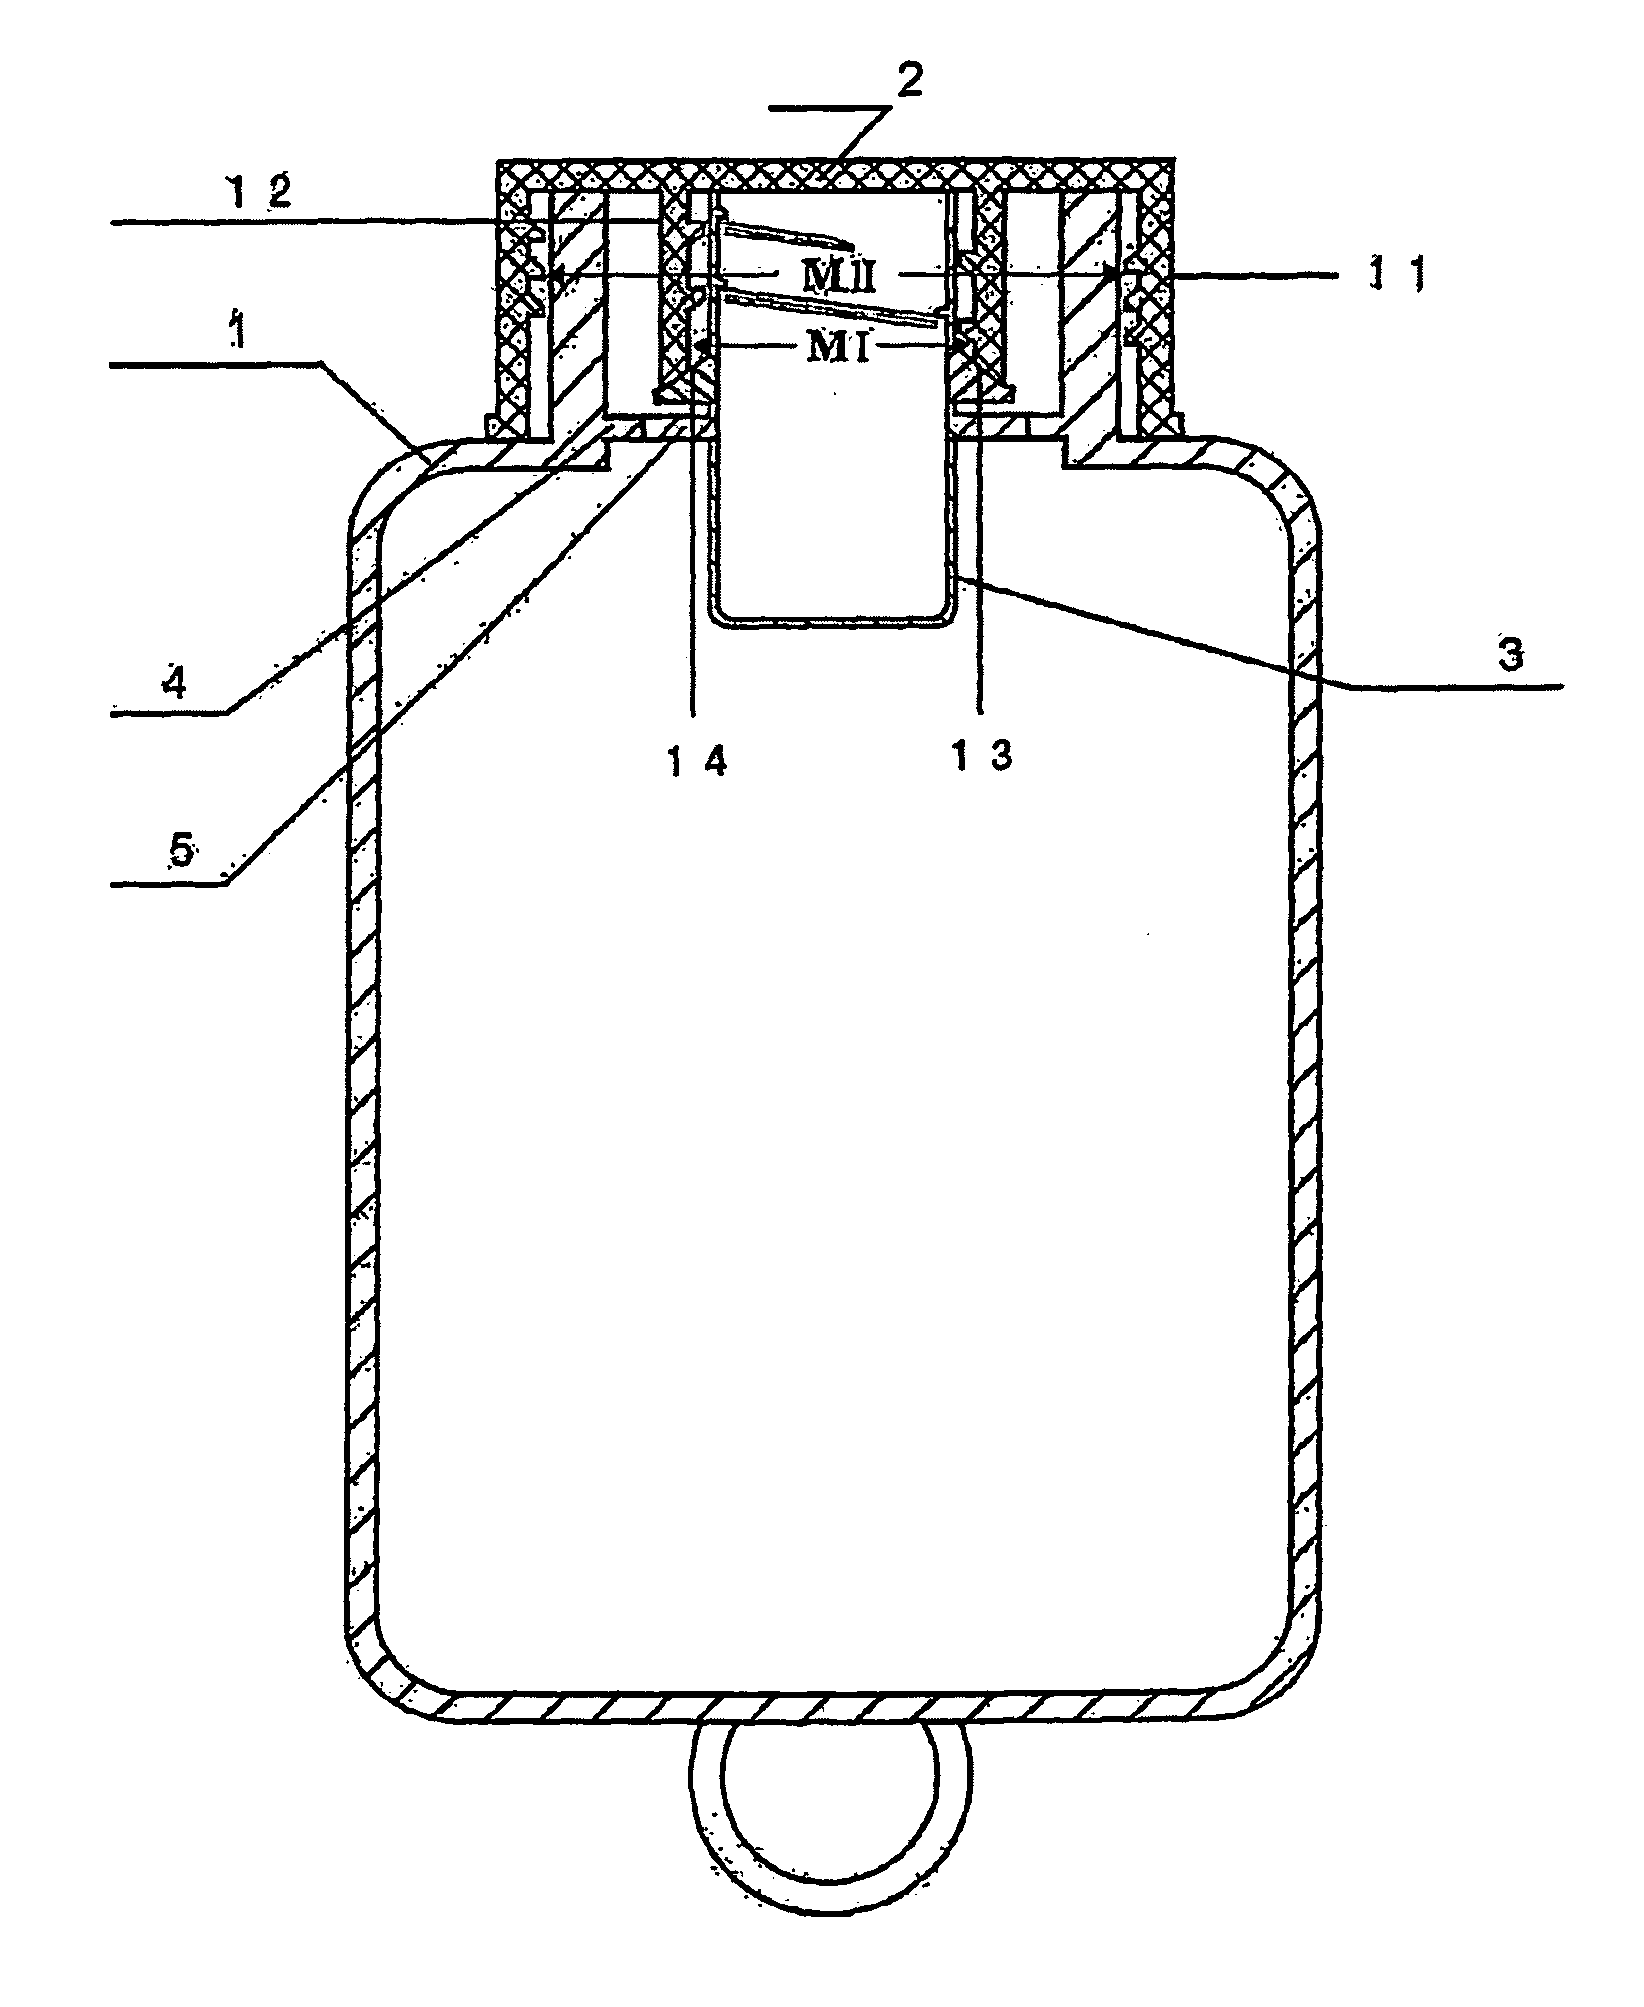 Self-mixing container with a releasable internal vessel and its usage